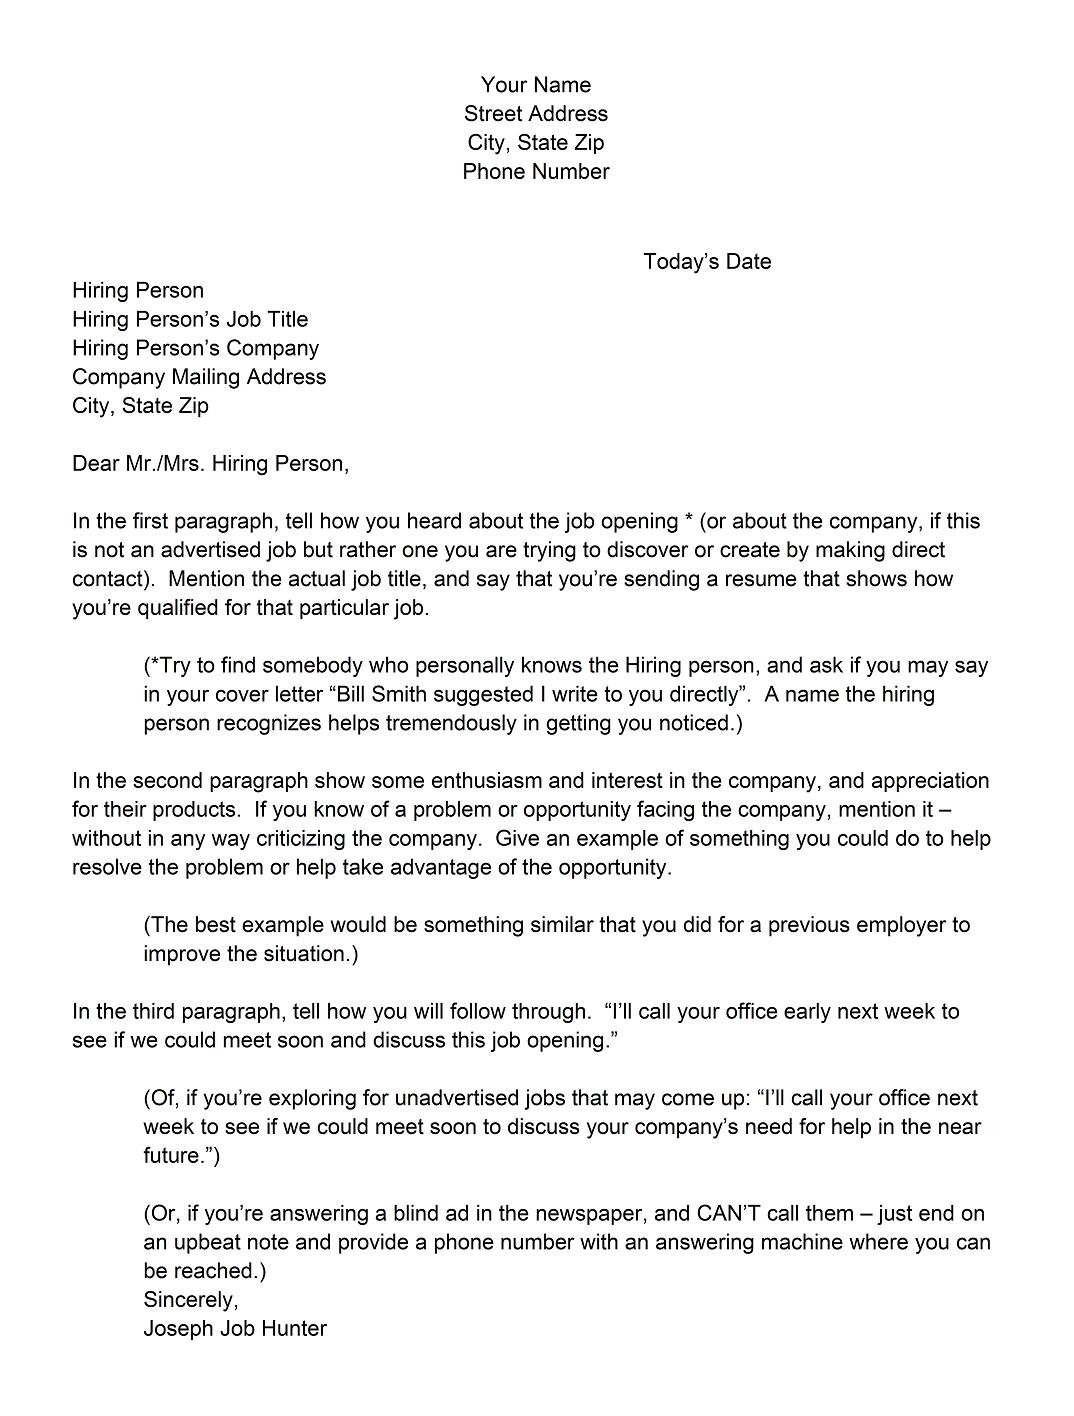 Cover Letters Best Way To Write Letter For Job Application Good Erwiin Blog Home